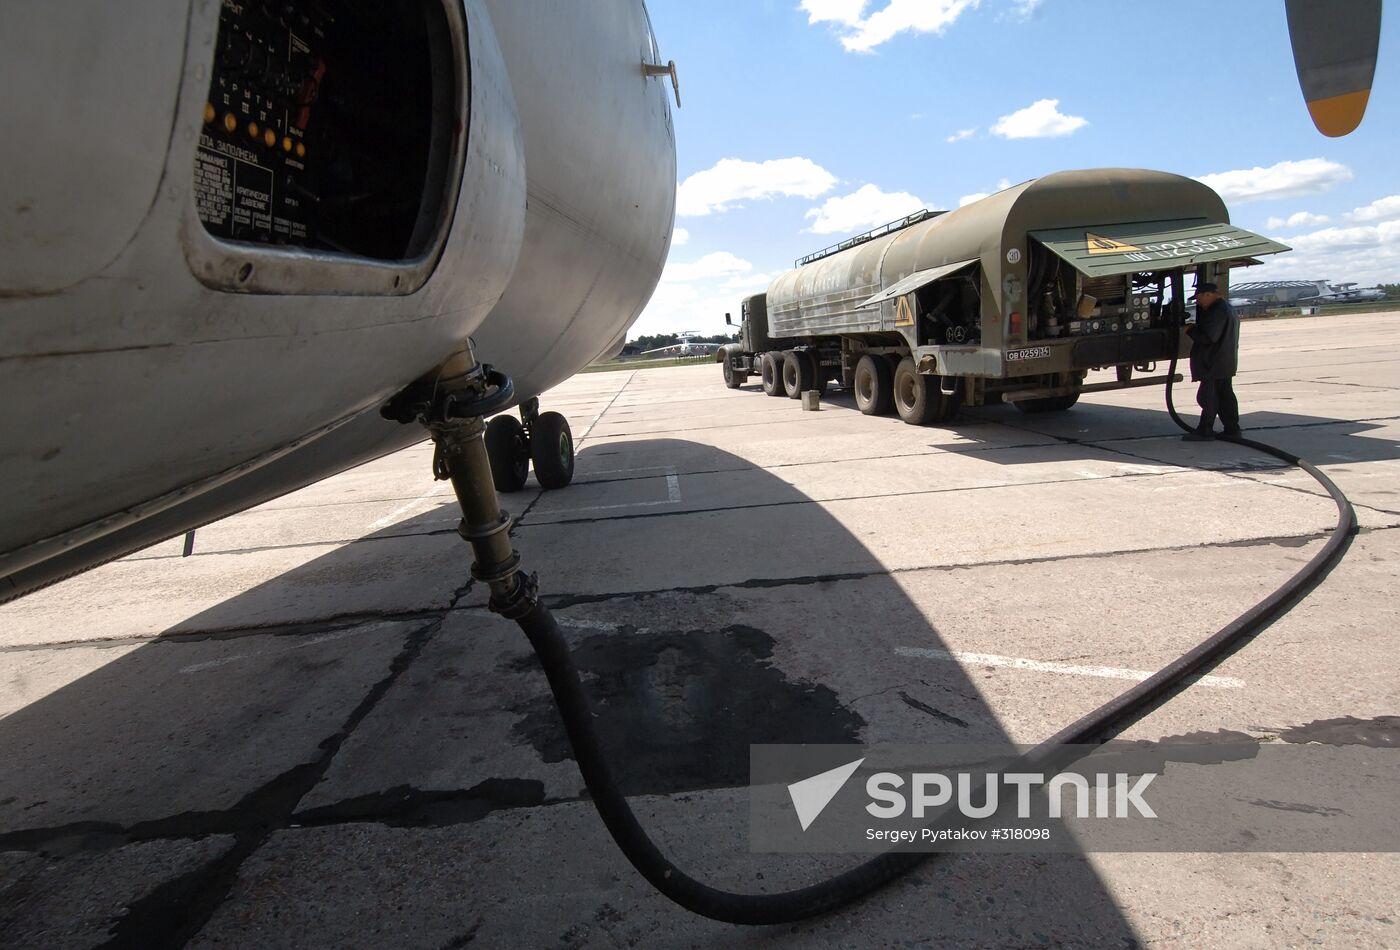 Refuelling a military transport plane